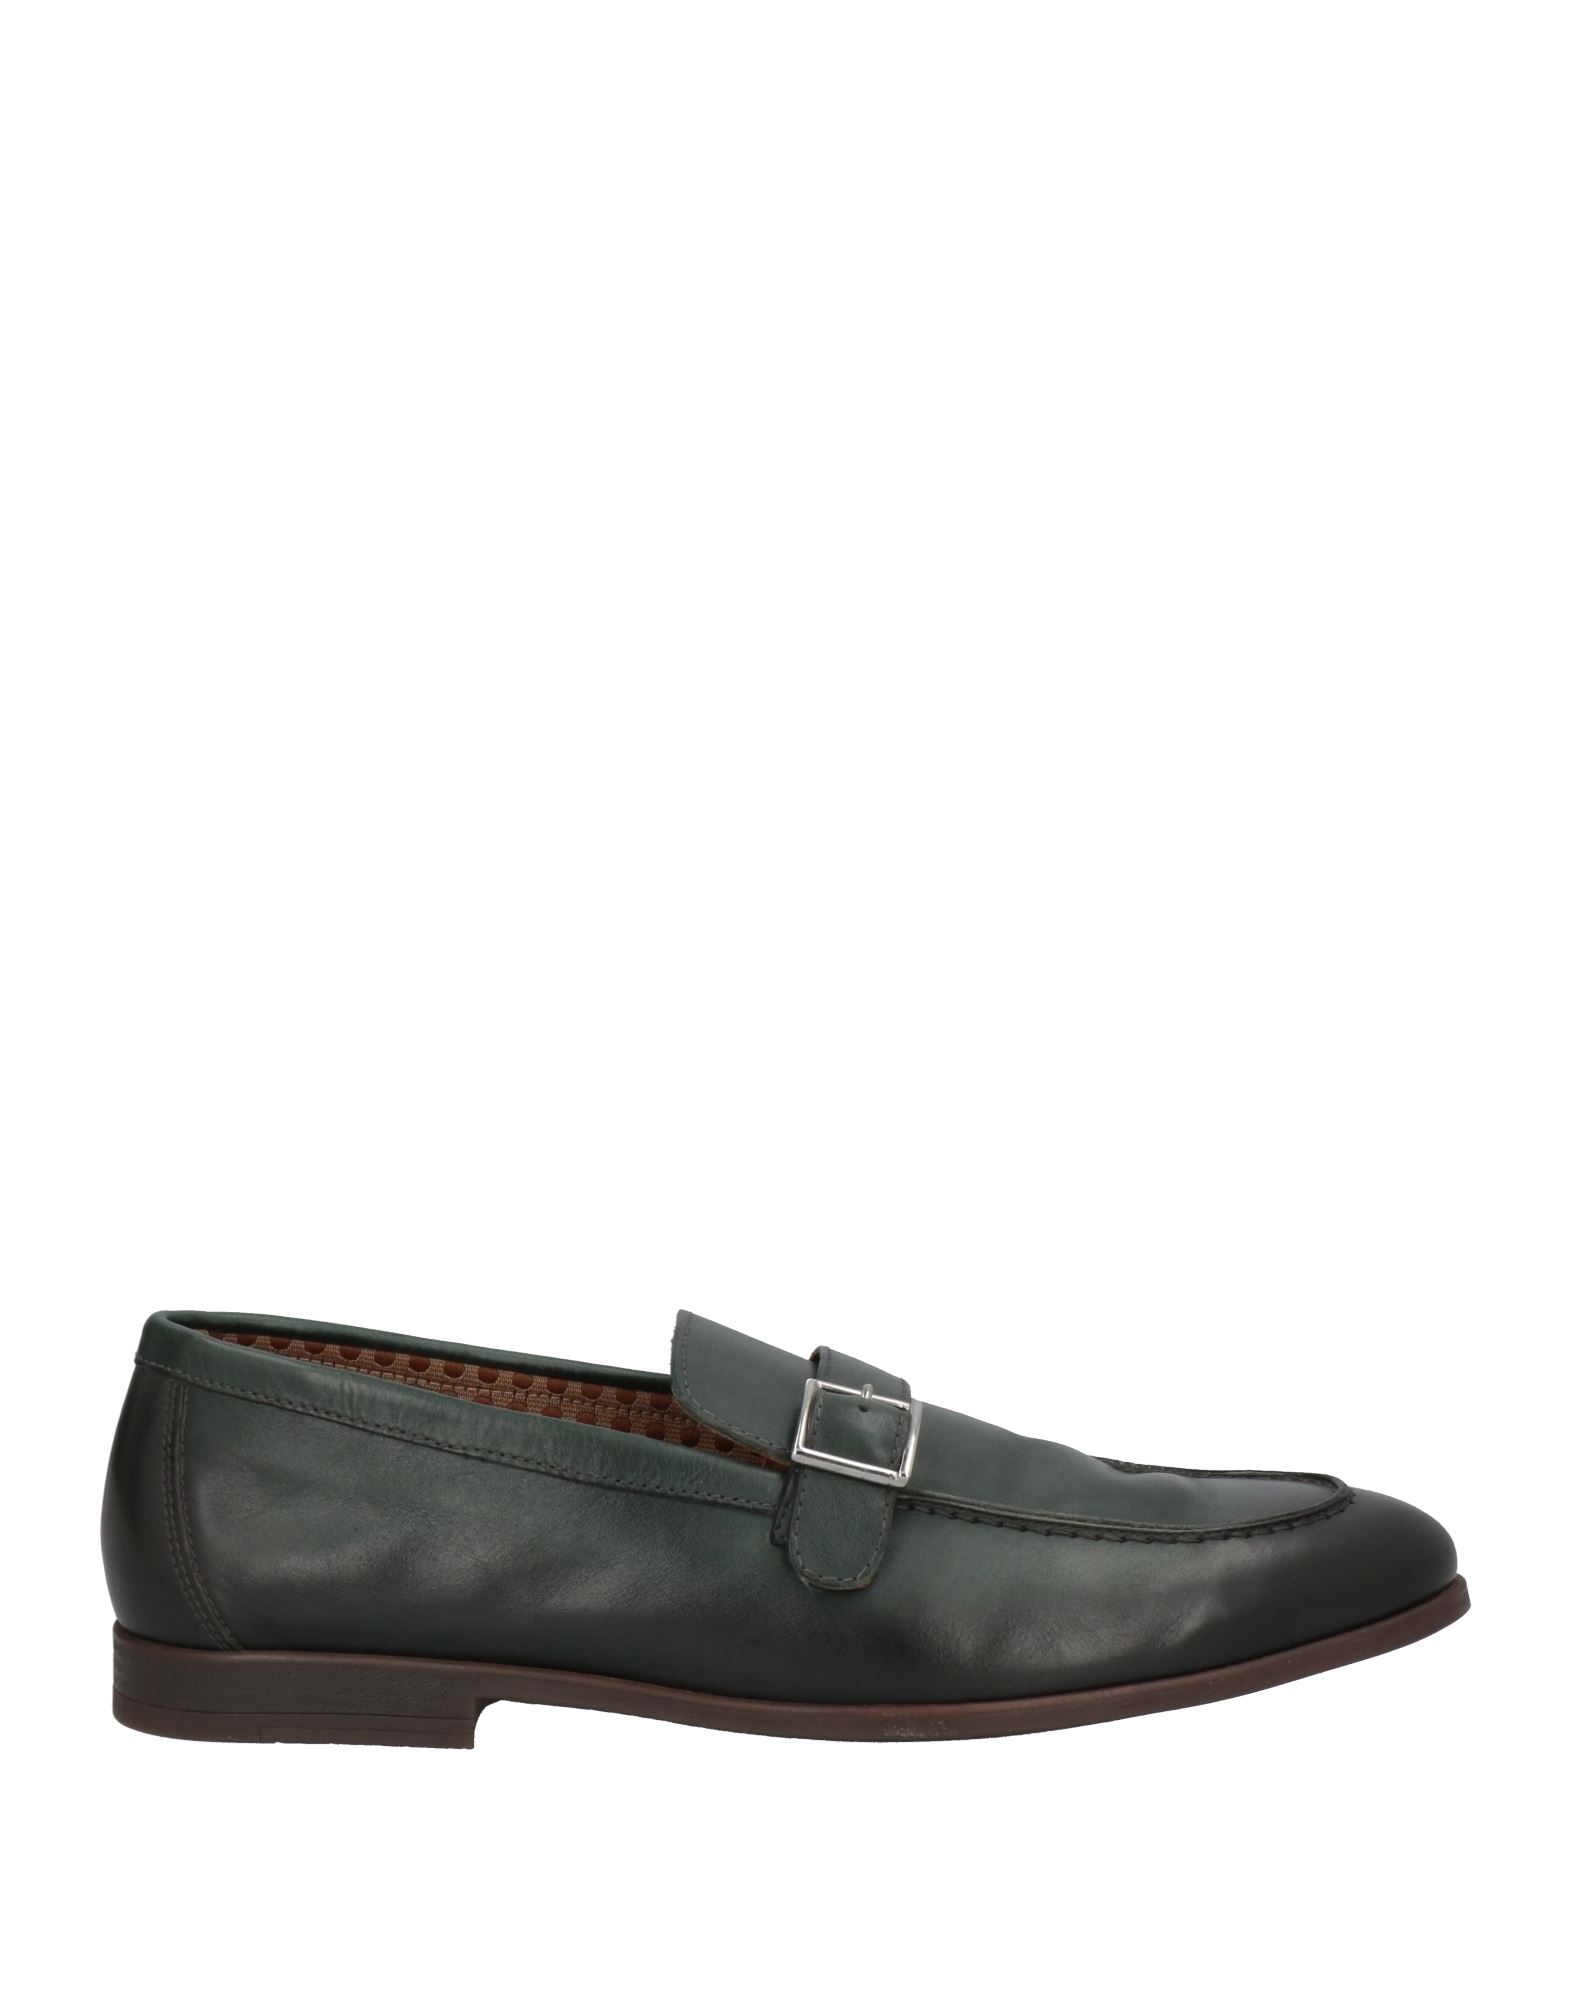 DOUCAL'S DOUCAL'S MAN LOAFERS DARK GREEN SIZE 11 SOFT LEATHER